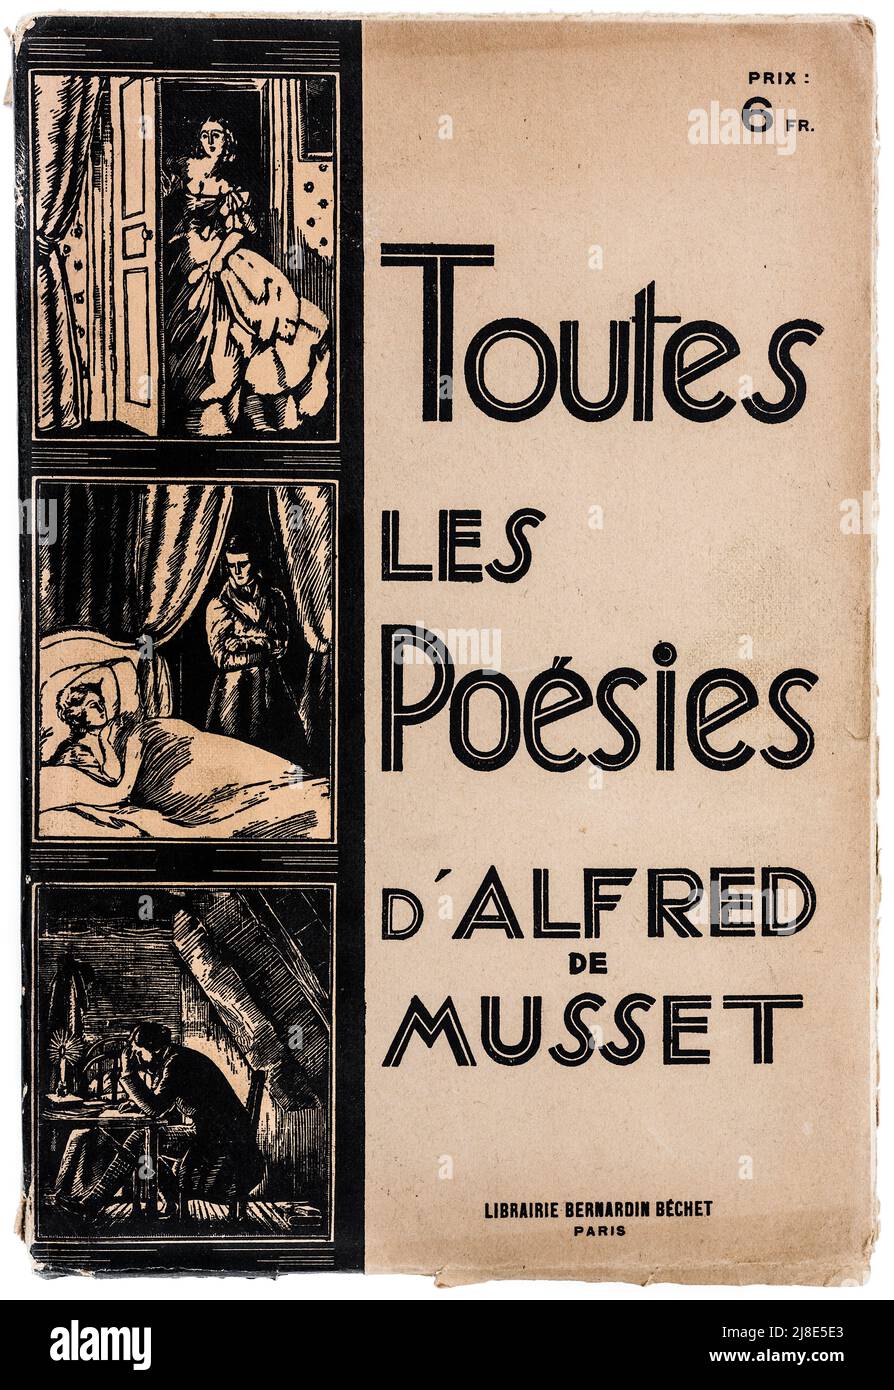 Cover of 'Toutes les Poésies d'Alfred Musset' (All the poems of Alfred Musset) published by Librairie Bernardin-Béchet, late 1800s. Stock Photo